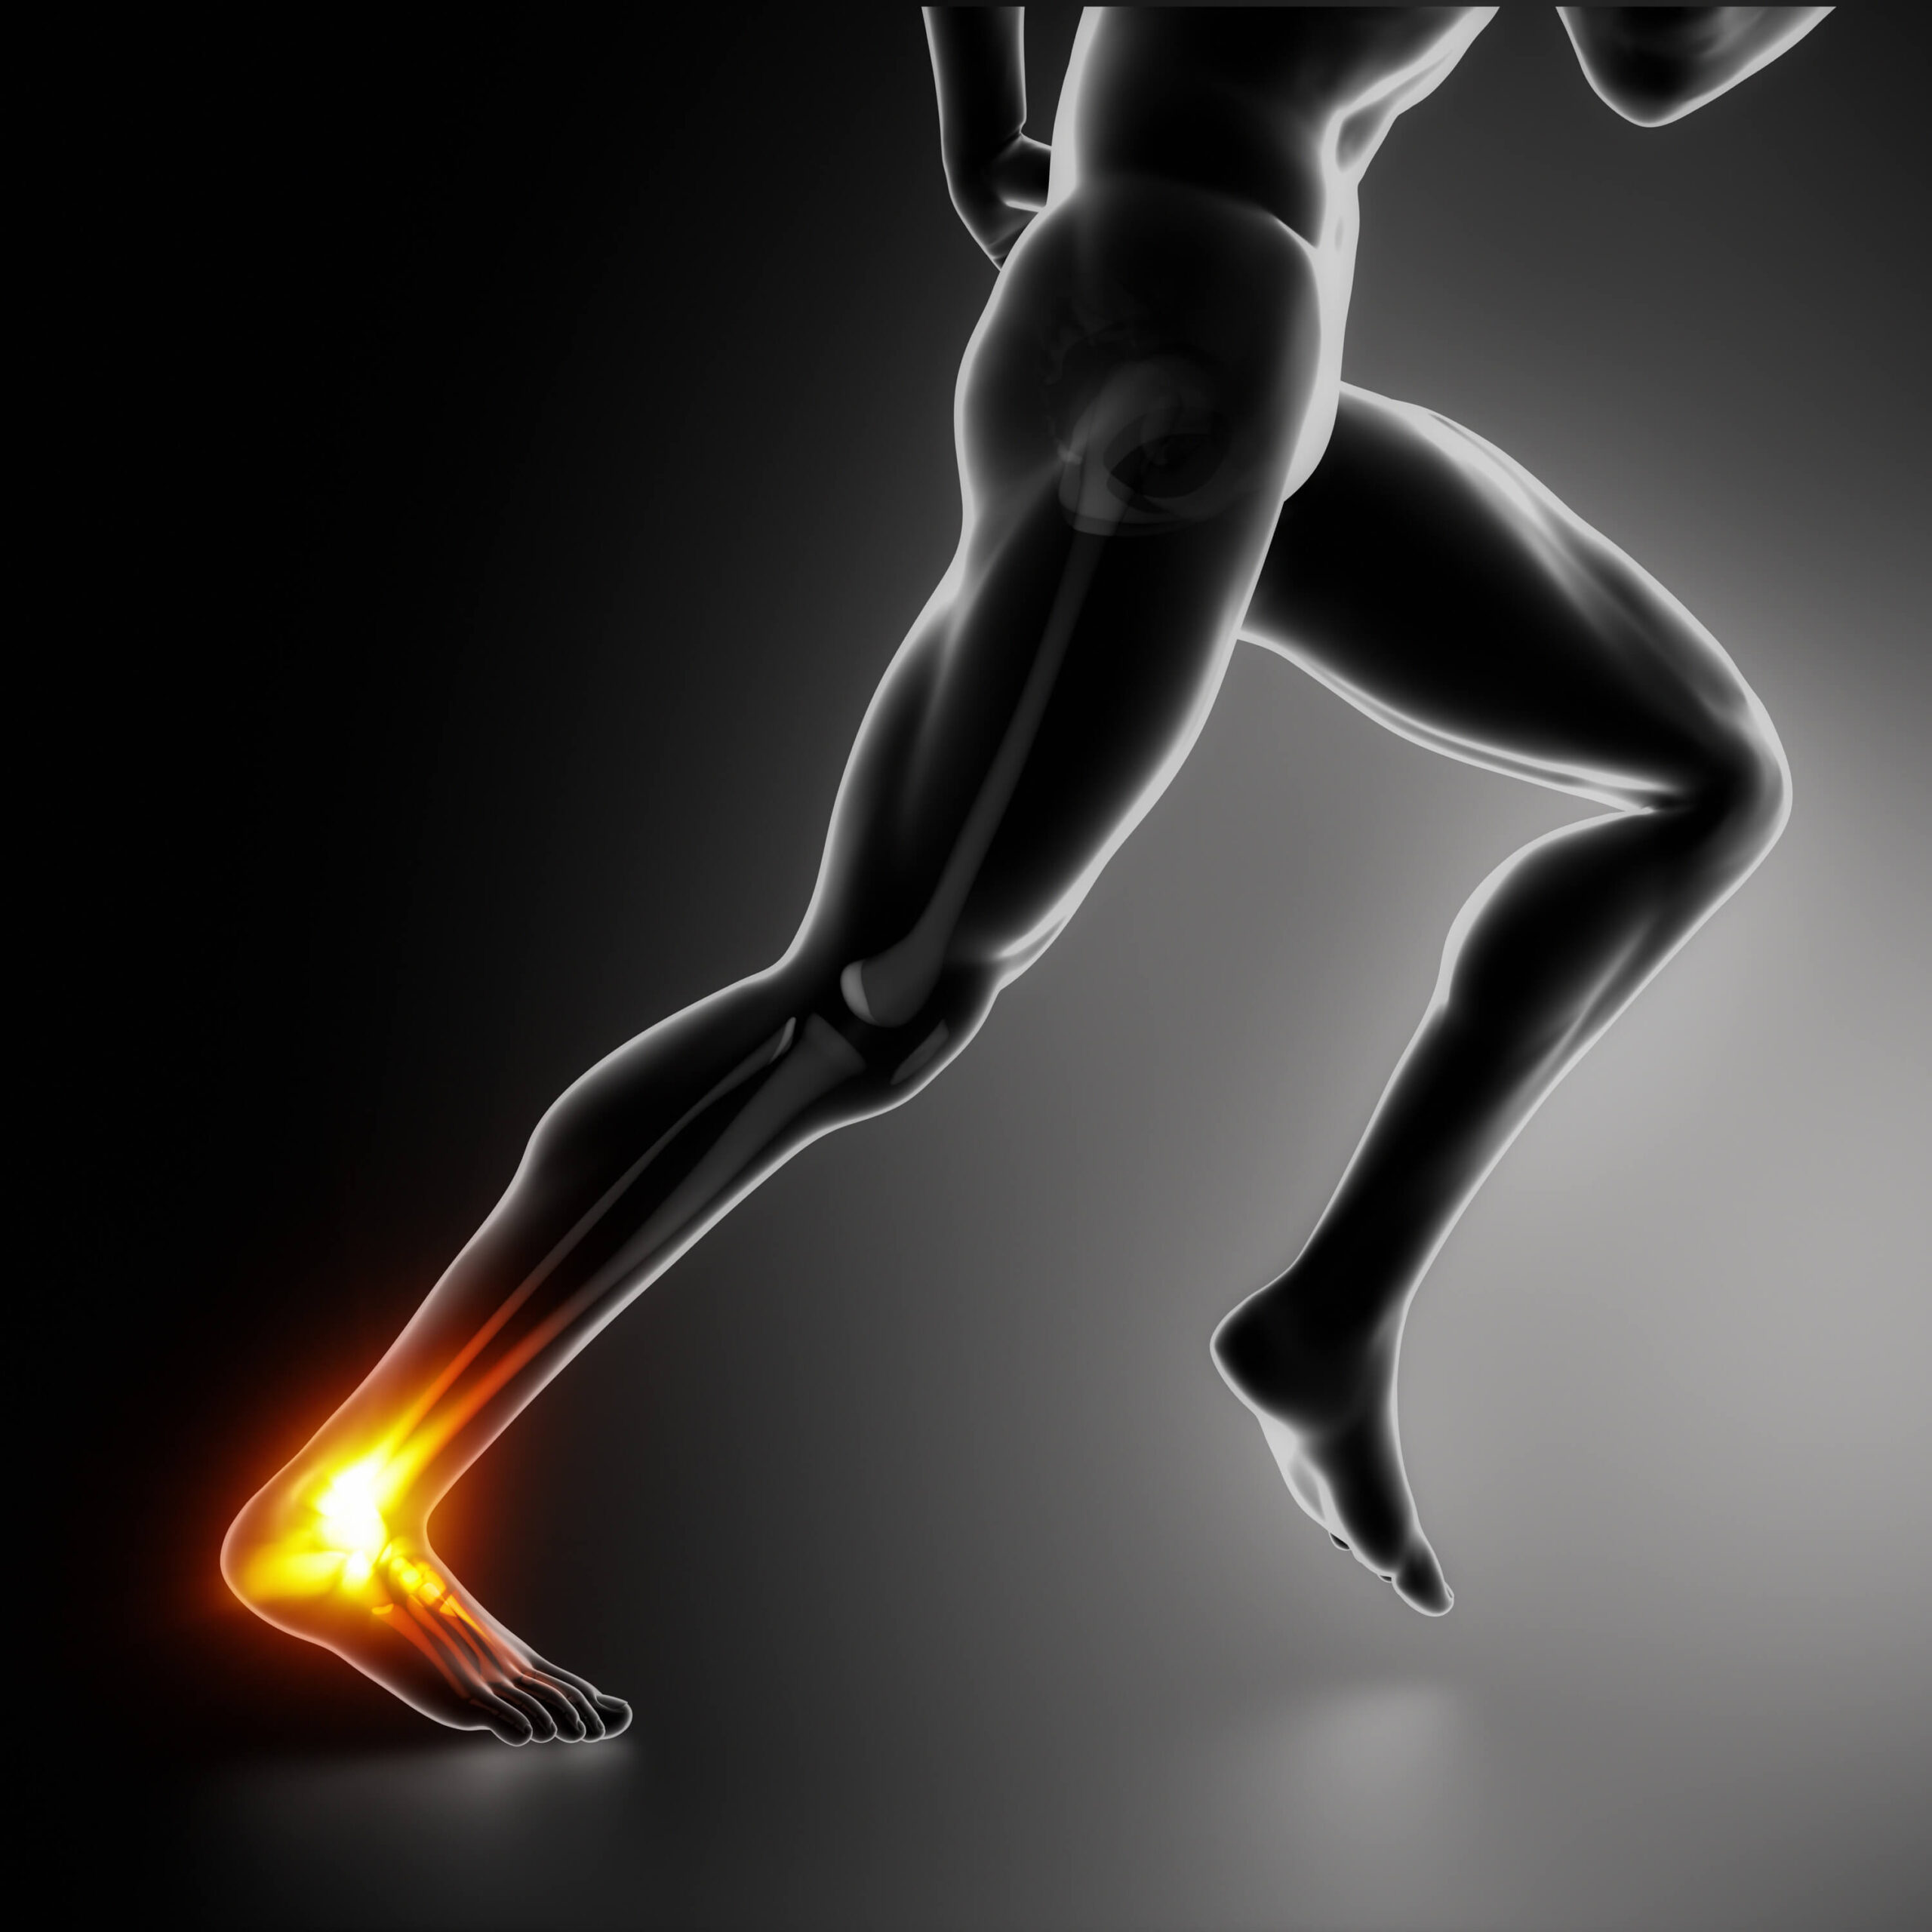 Knee Pain When Squatting: Causes, Treatment & Prevention